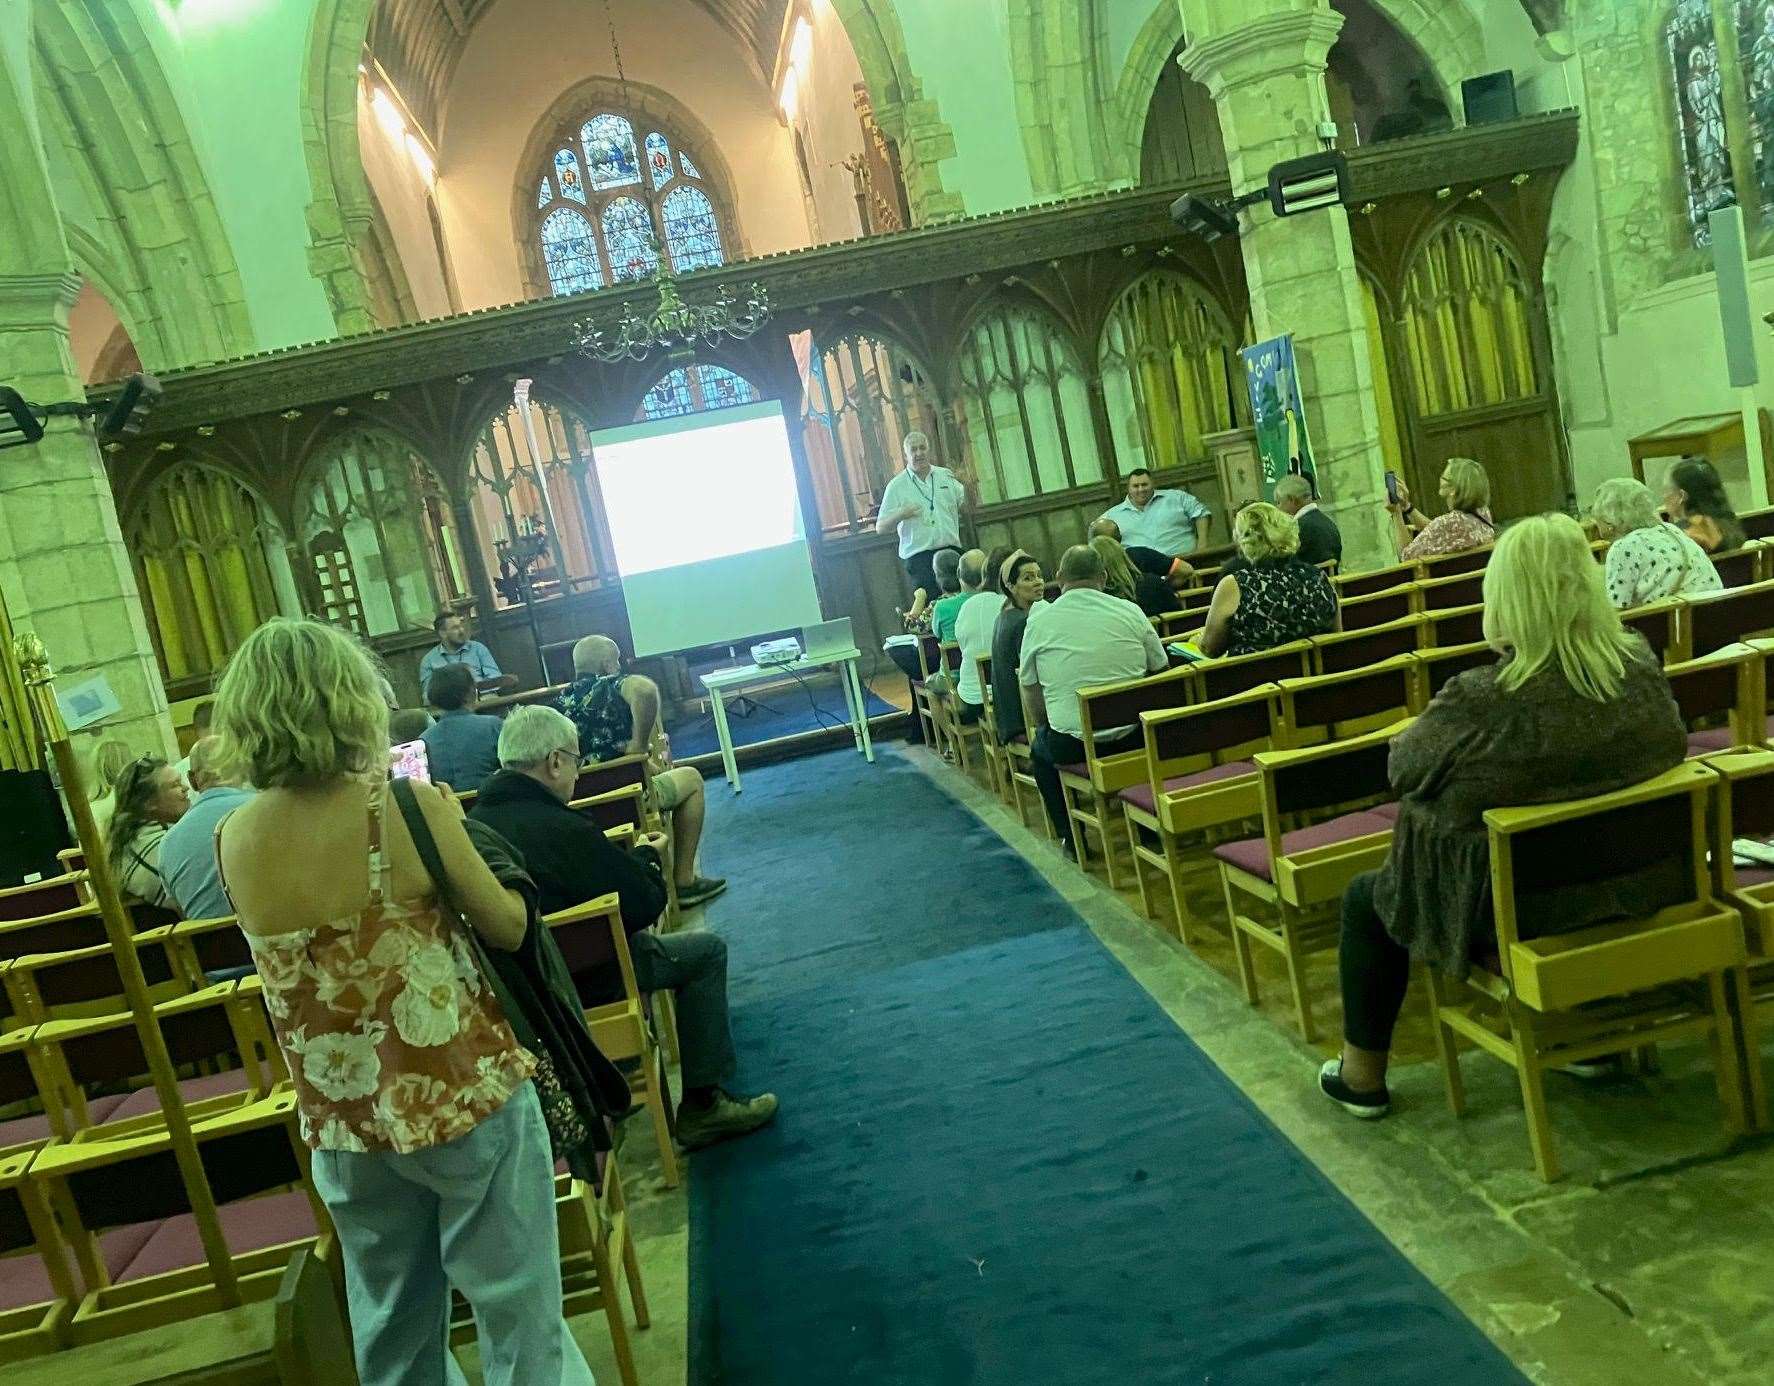 The KCC public meeting on the roadworks in Leeds was held at St Nicholas Church in Leeds